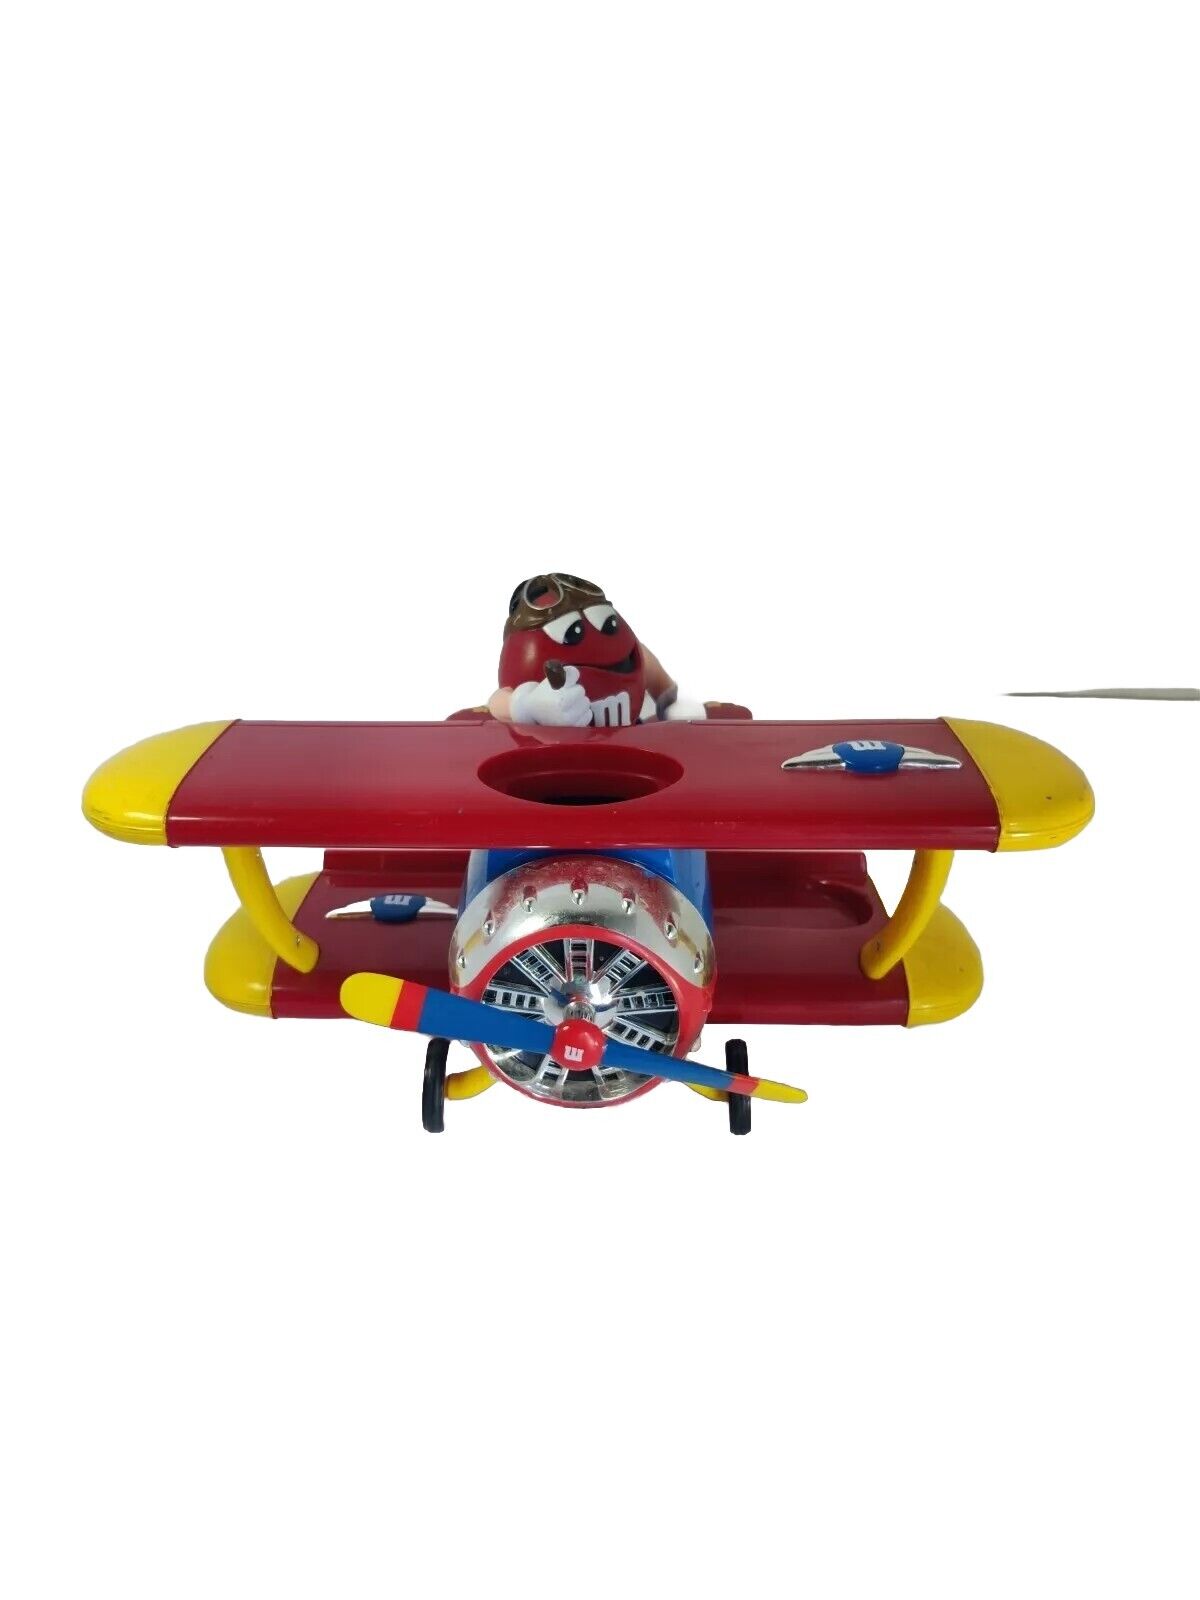 M & M\'s High Flyers Barnstorming Red M&M\'s Airplane 